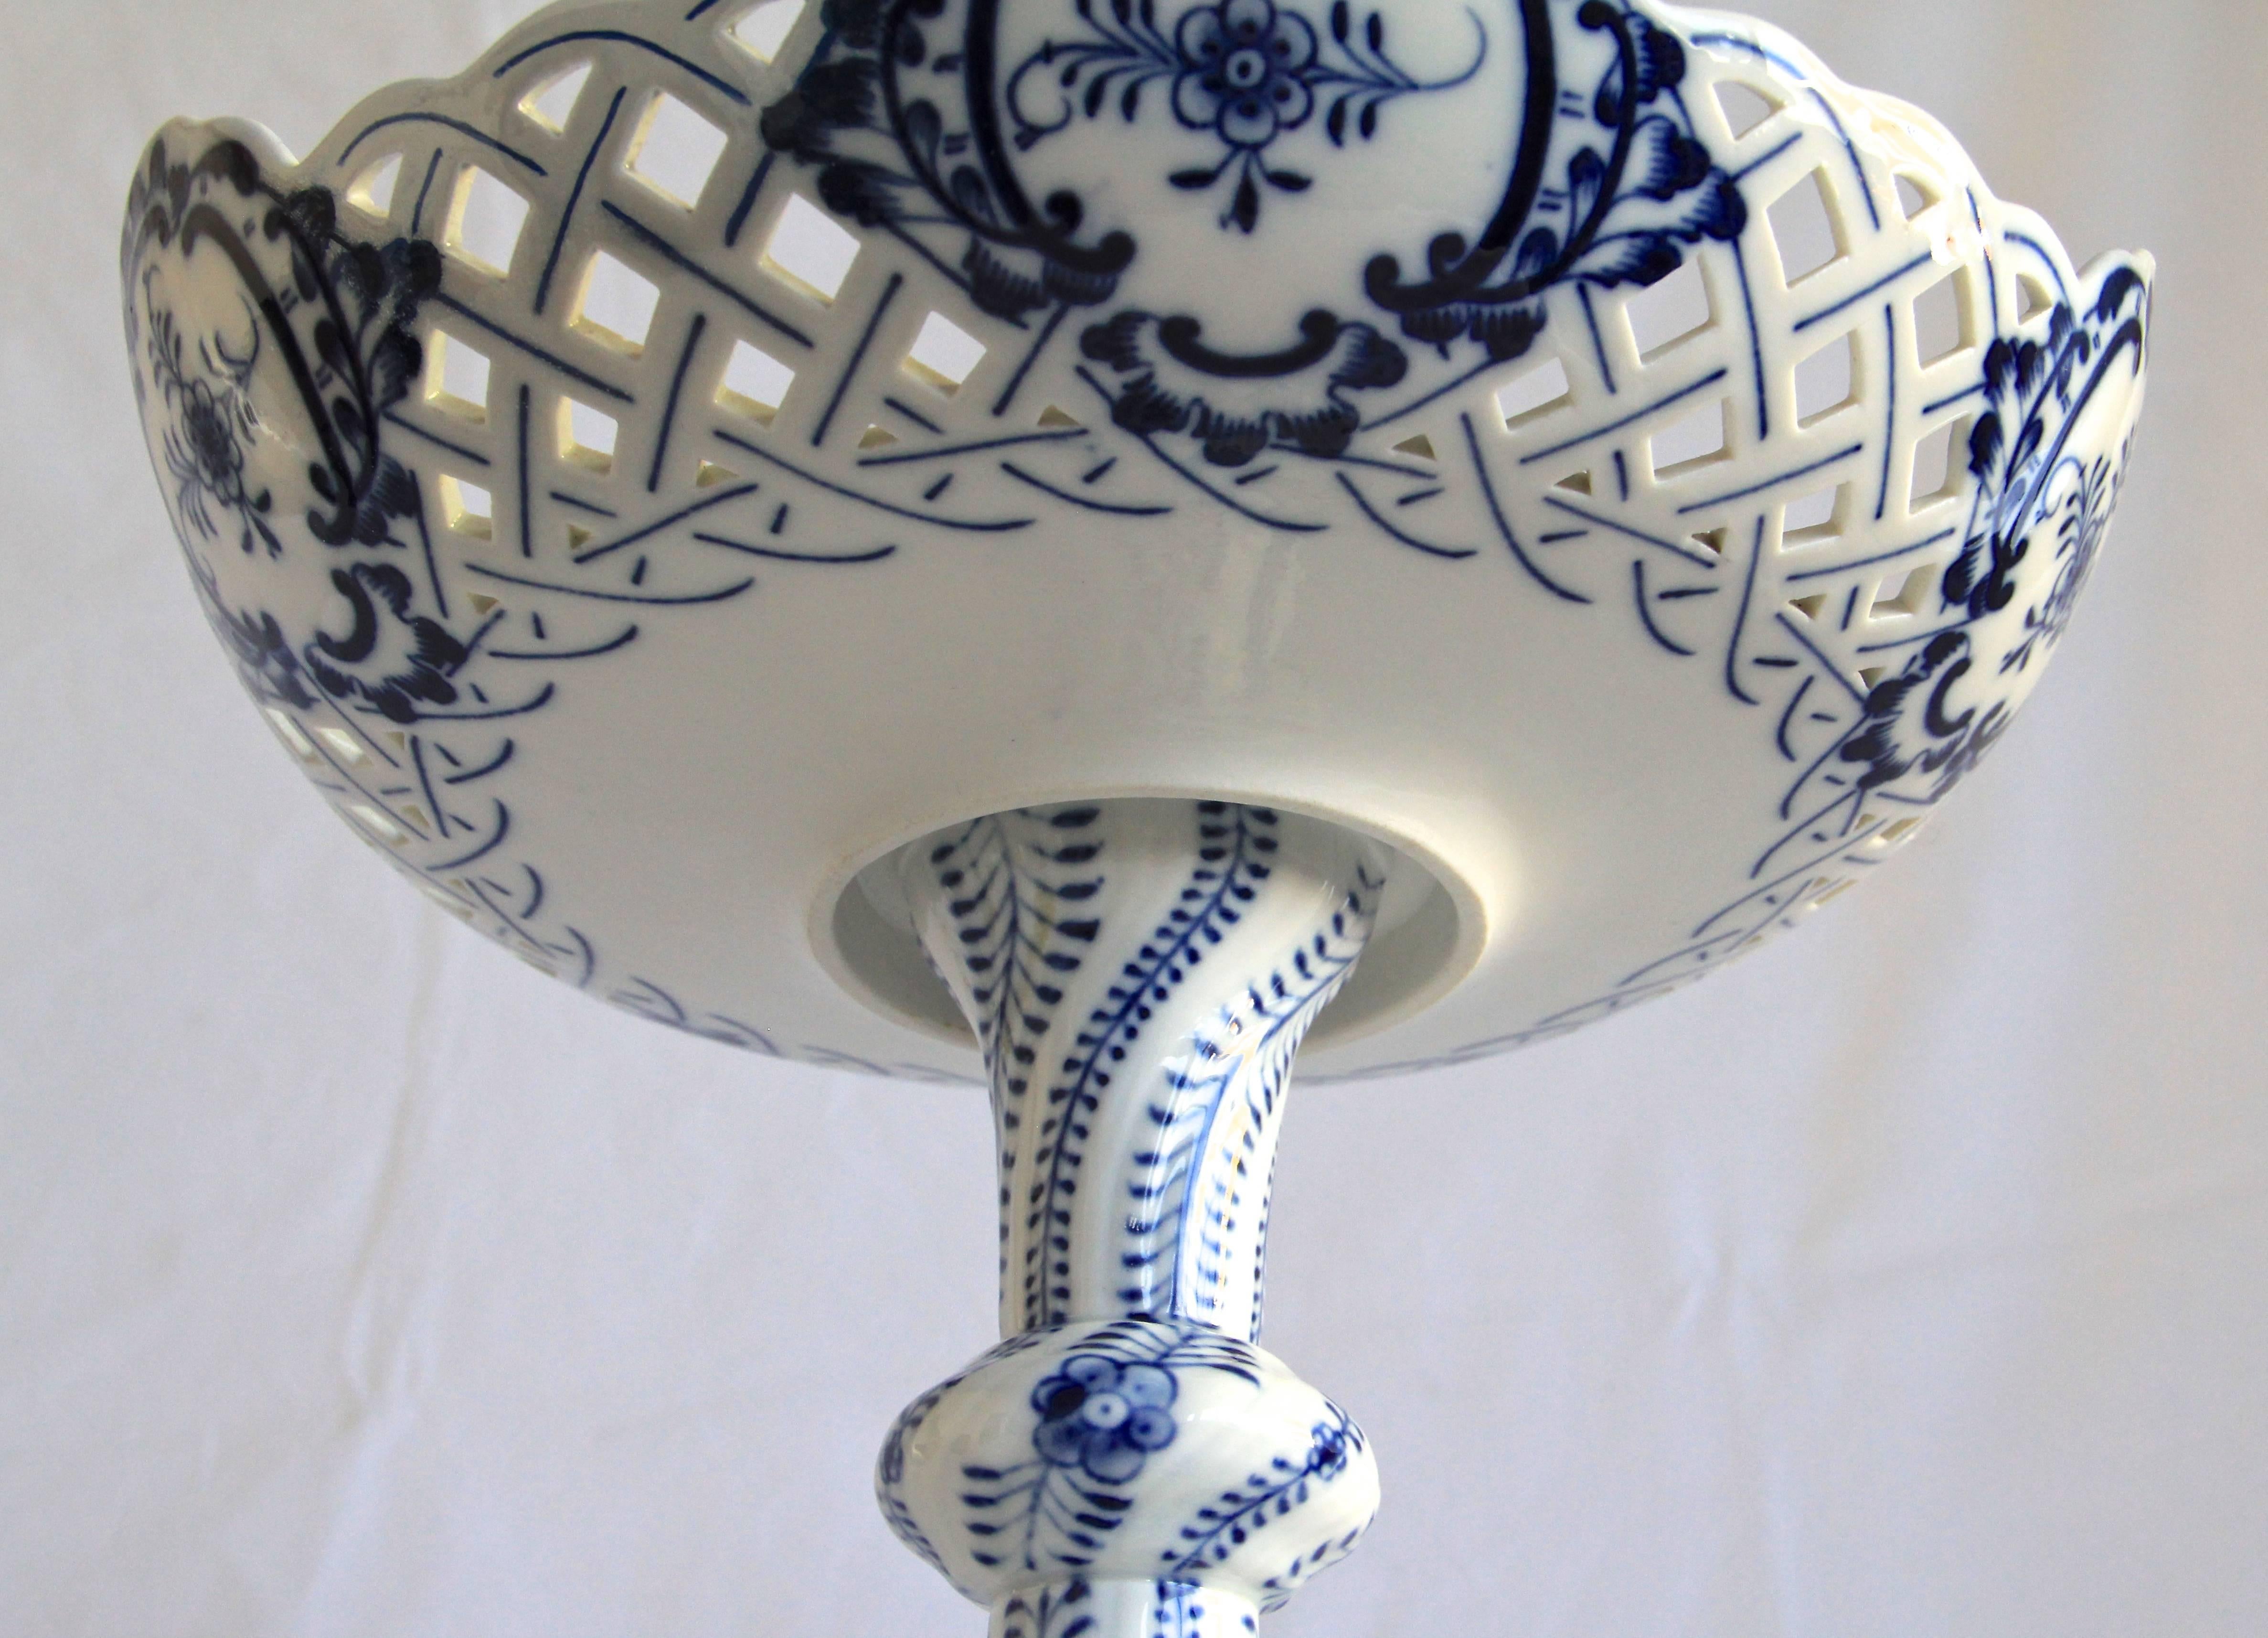 Lovely Porcelain Centerpiece with blue onion Pattern produced by the world-renown german manufactory of Meissen from circa 1880. This hand painted late 19th century centerpiece shows a partly open artfully worked bowl sitting on a great shaped base